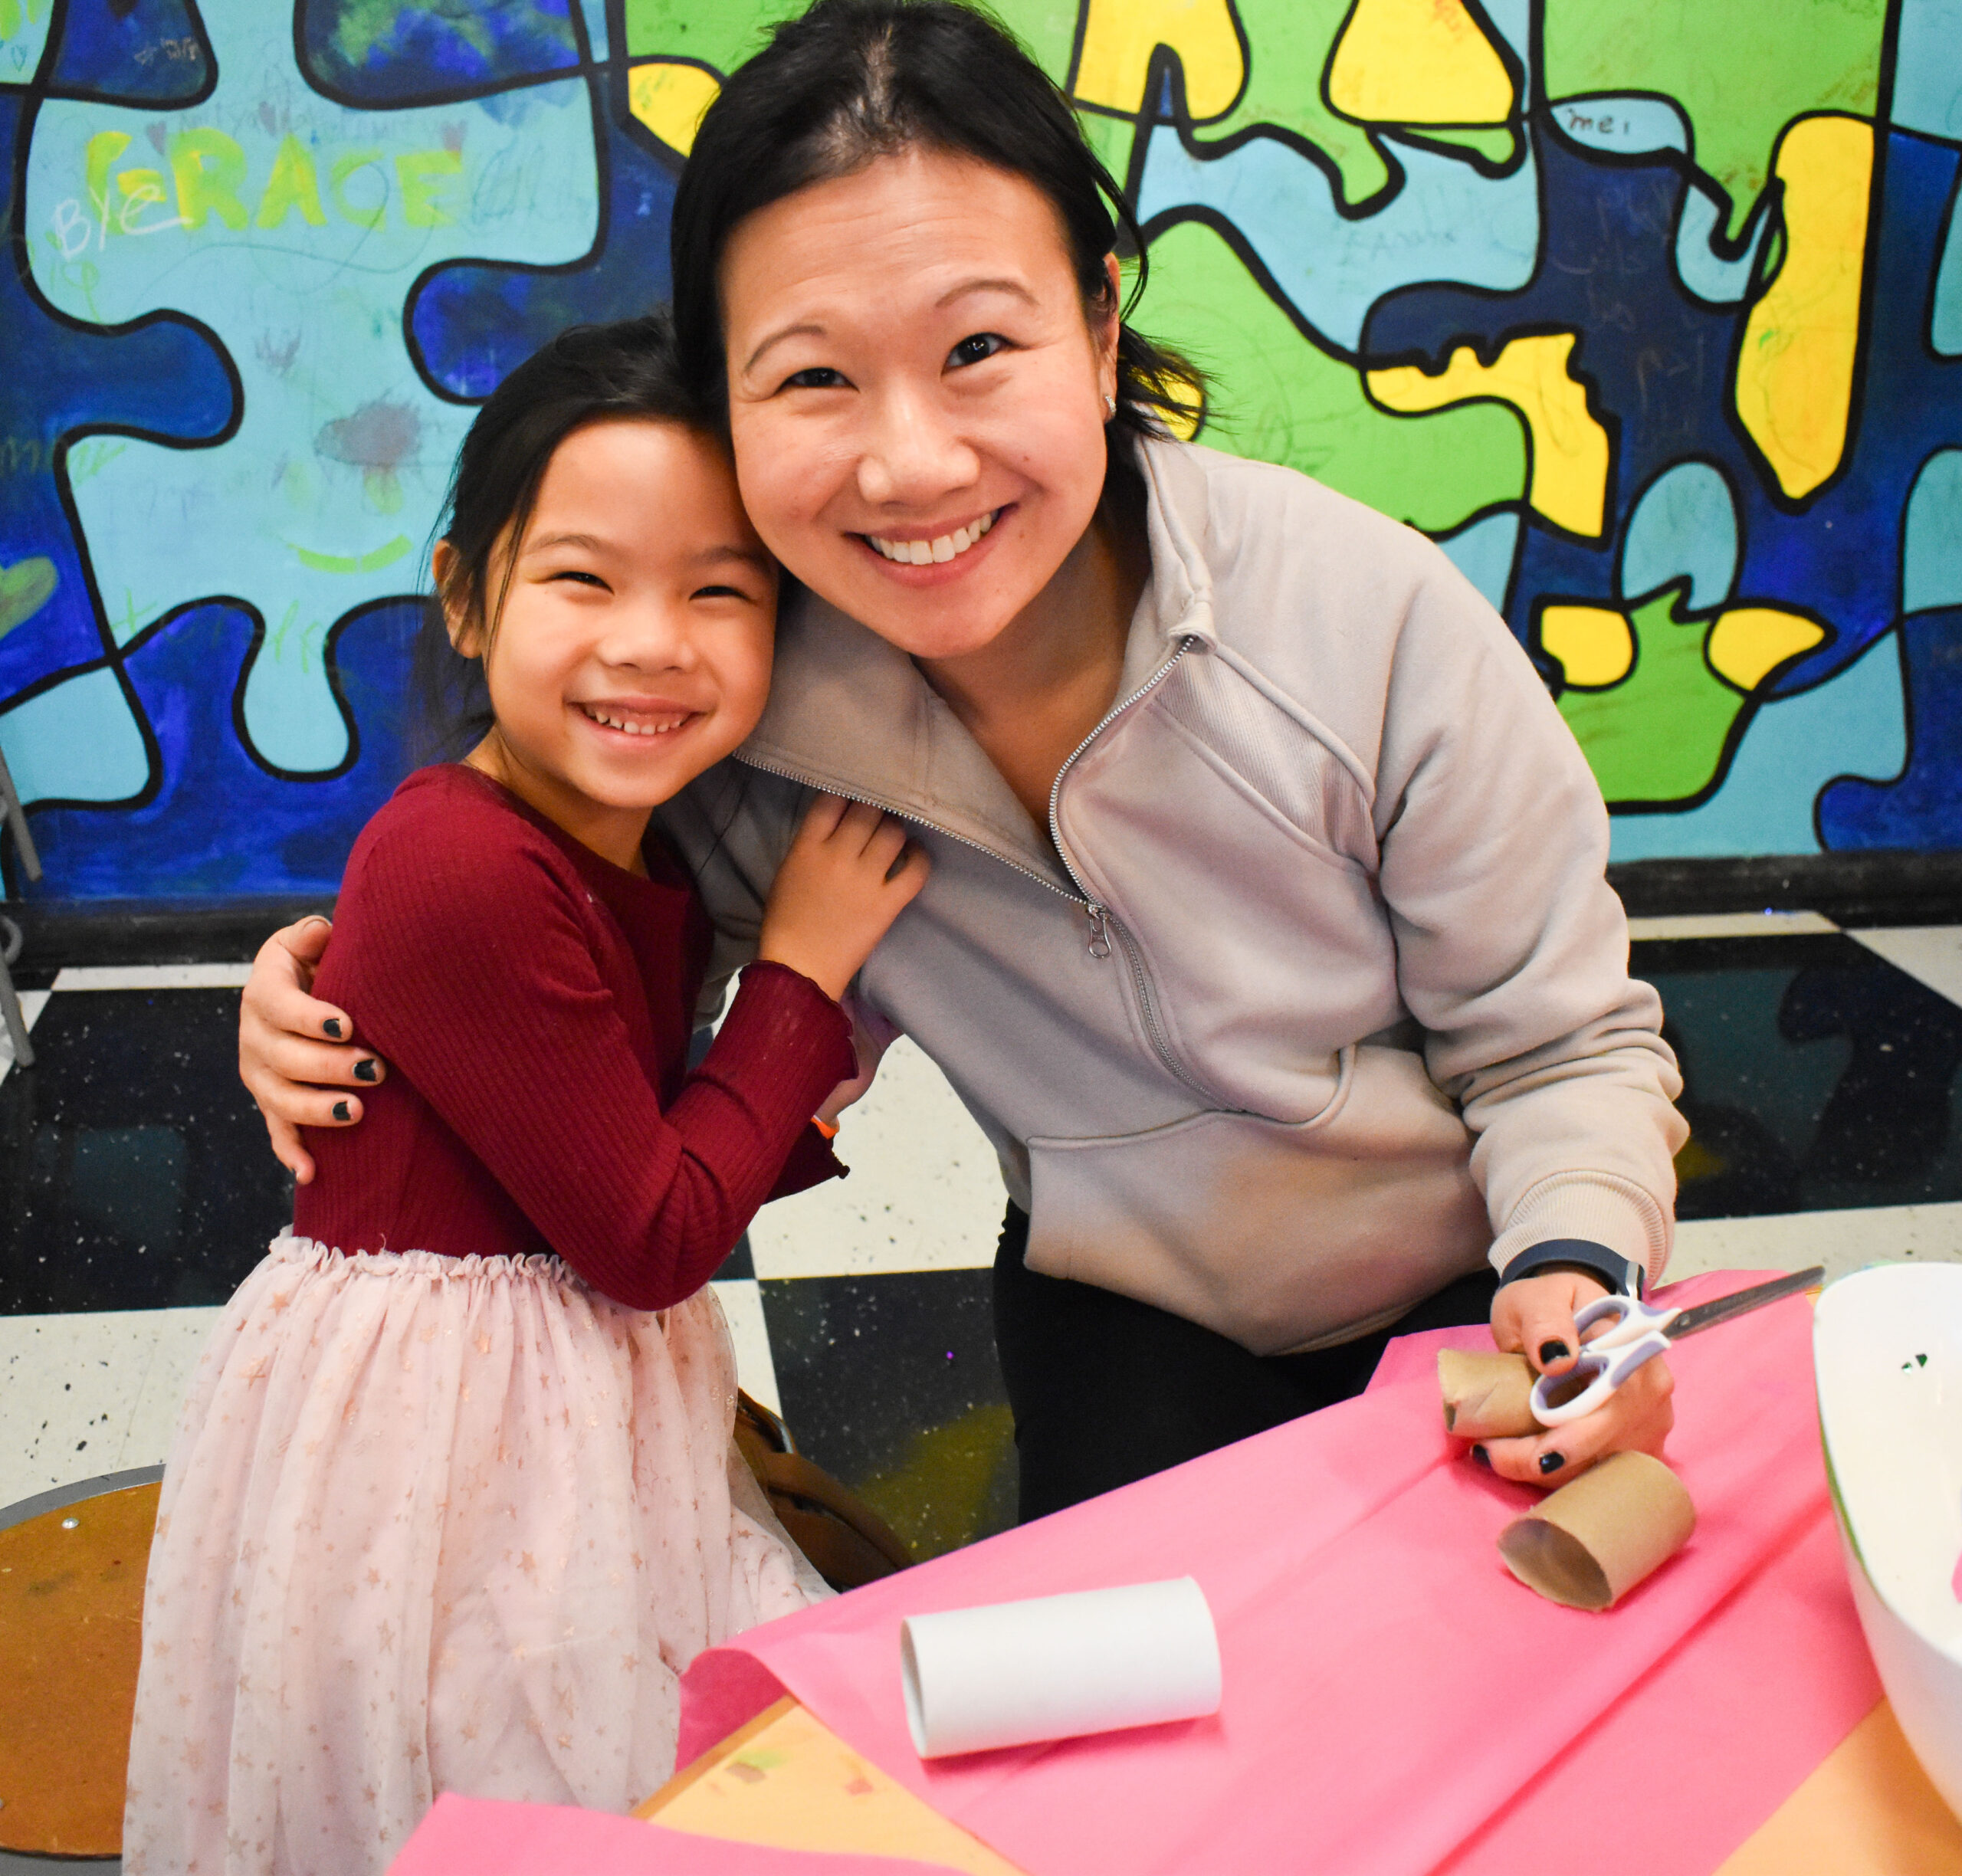 a woman and child sitting at a table and smiling with art supplies in front of them